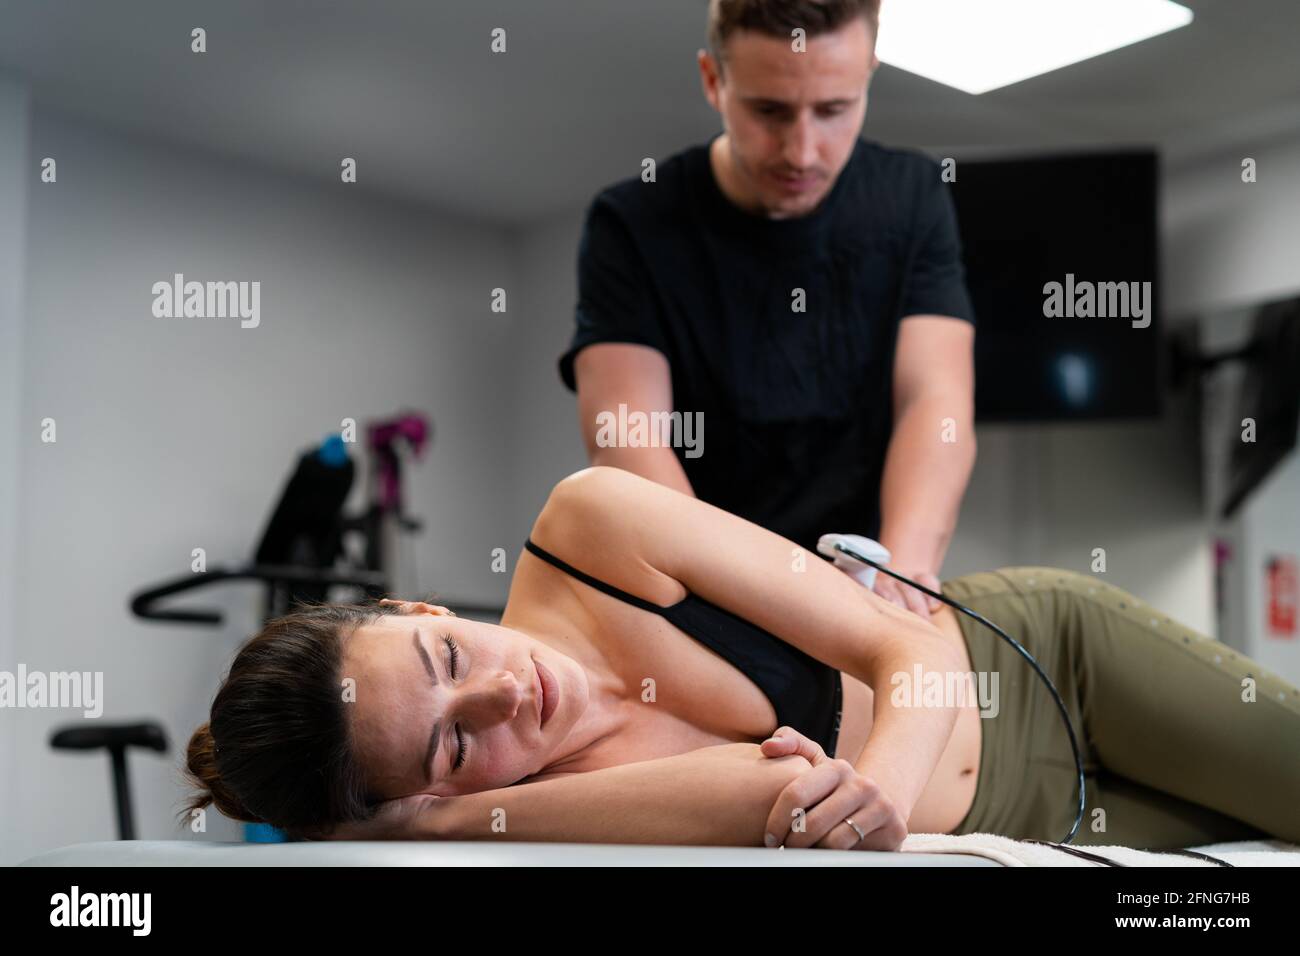 Male physiotherapist applying laser to back skin of female during medical treatment in hospital Stock Photo